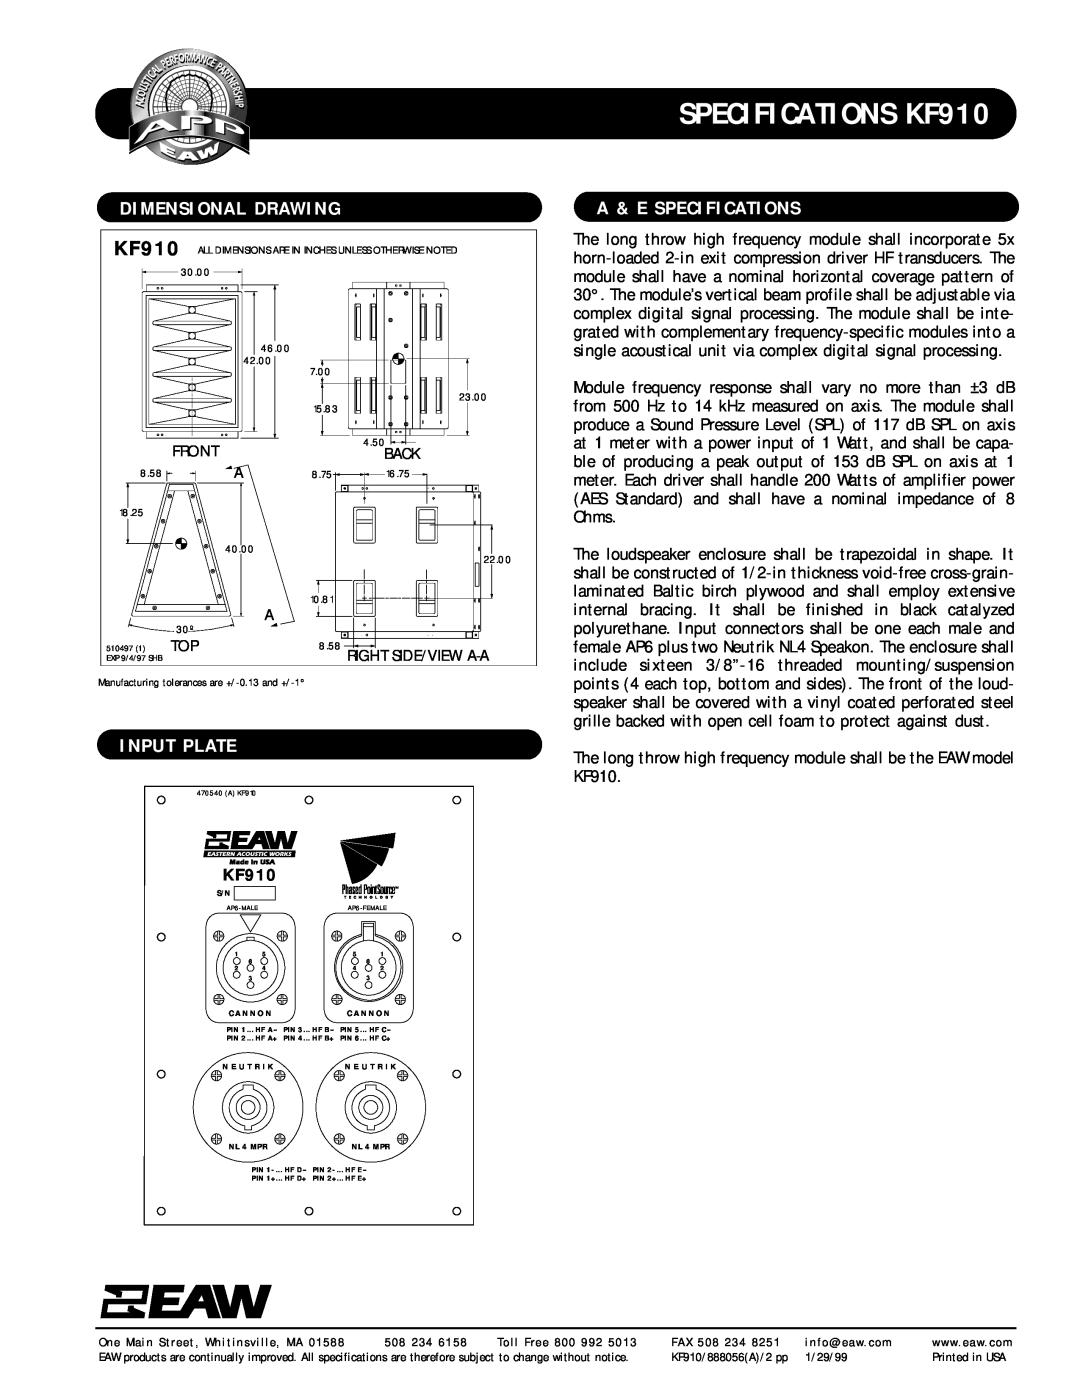 EAW specifications Dimensional Drawing, Input Plate, A & E Specifications, SPECIFICATIONS KF910 